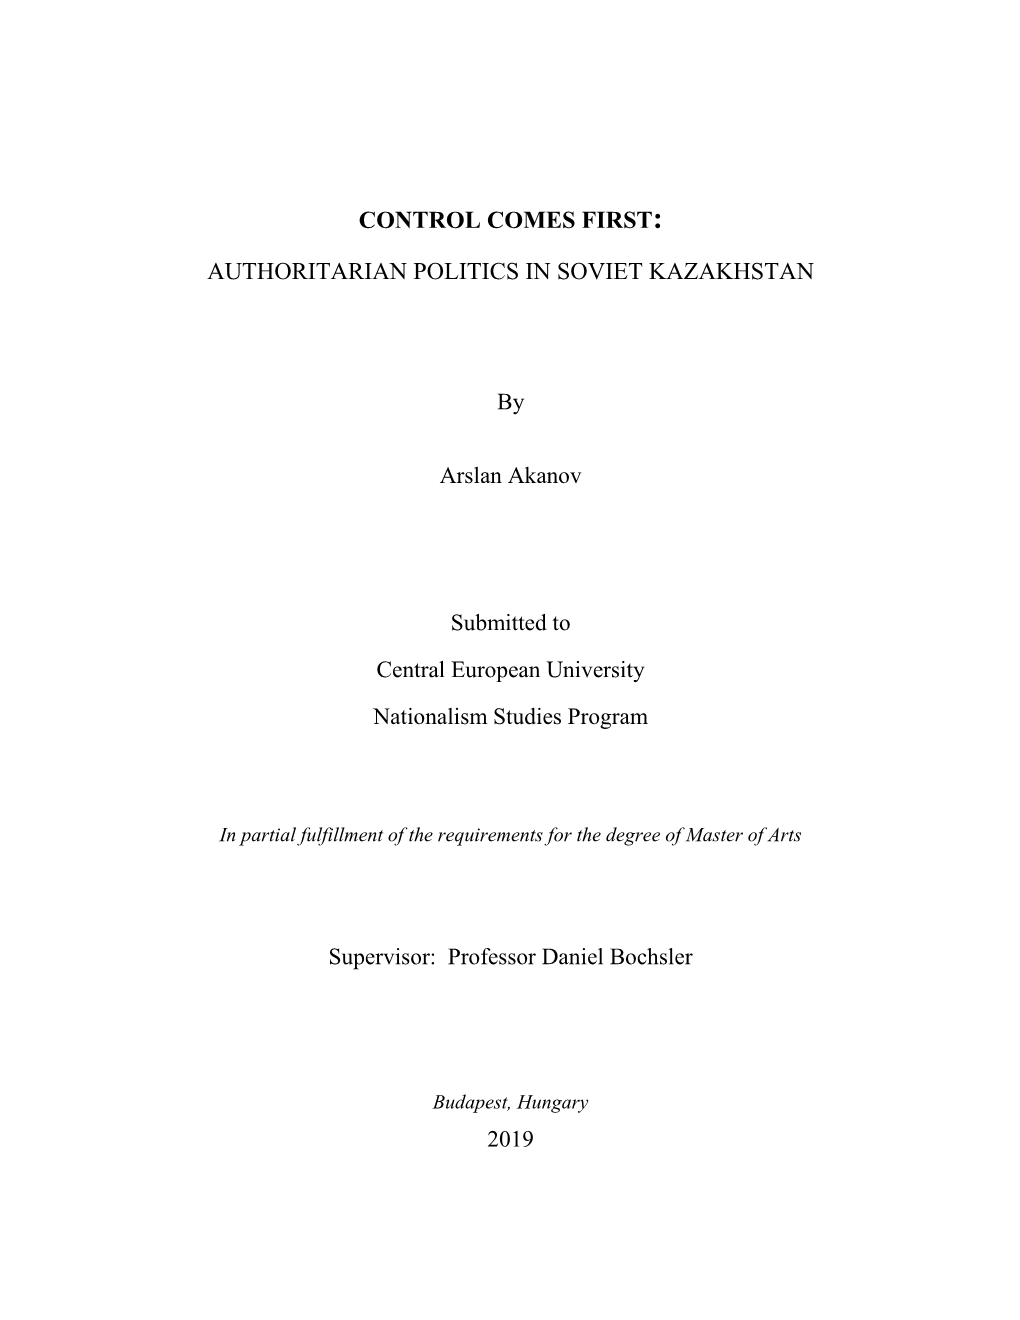 CONTROL COMES FIRST: AUTHORITARIAN POLITICS in SOVIET KAZAKHSTAN by Arslan Akanov Submitted to Central European University Natio